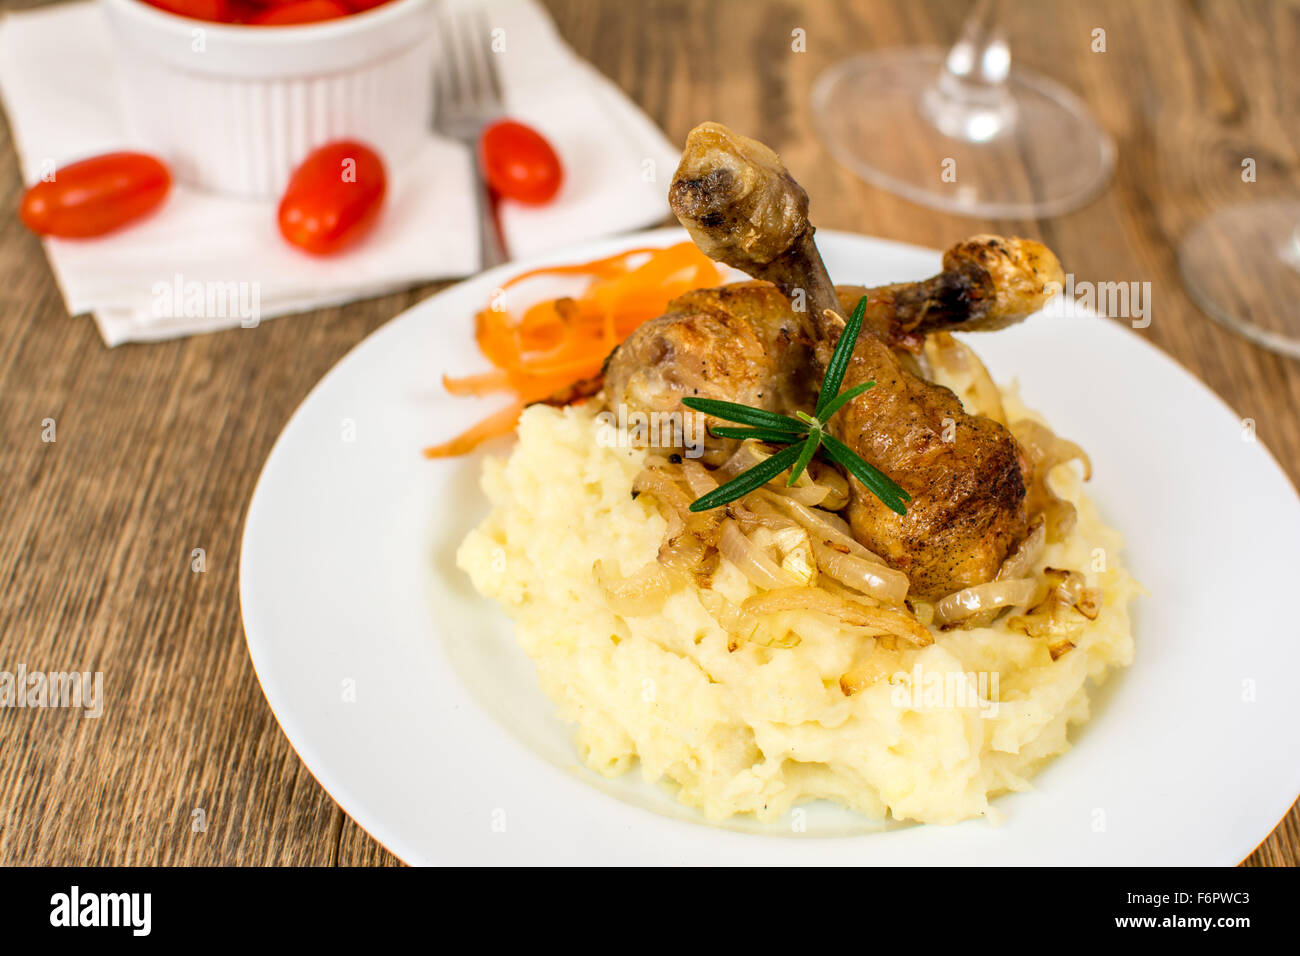 Grilled chicken thigh or leg with potato mash Stock Photo